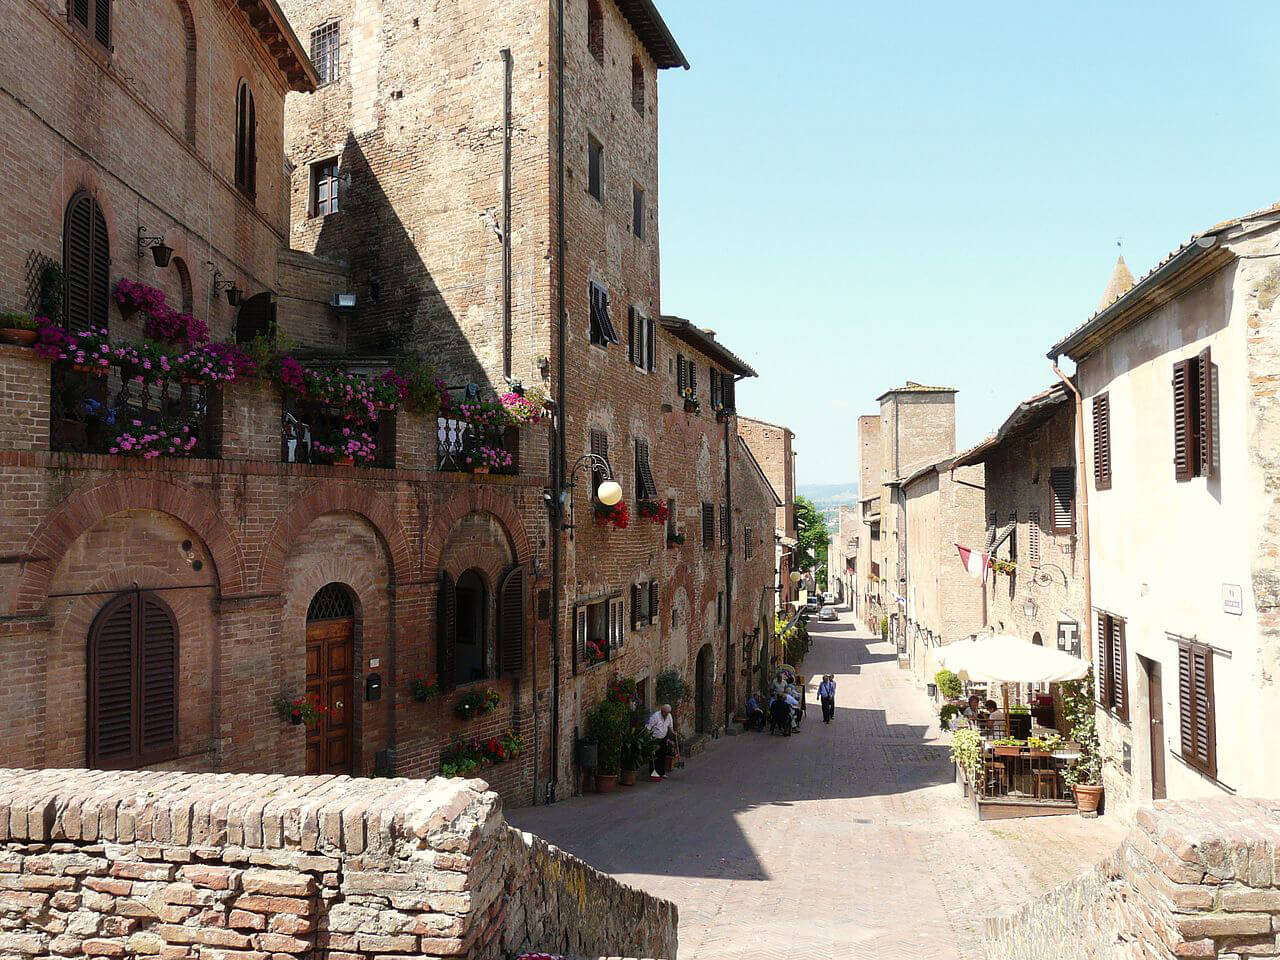 The tourists left from Greve in Chianti to visit Certaldo